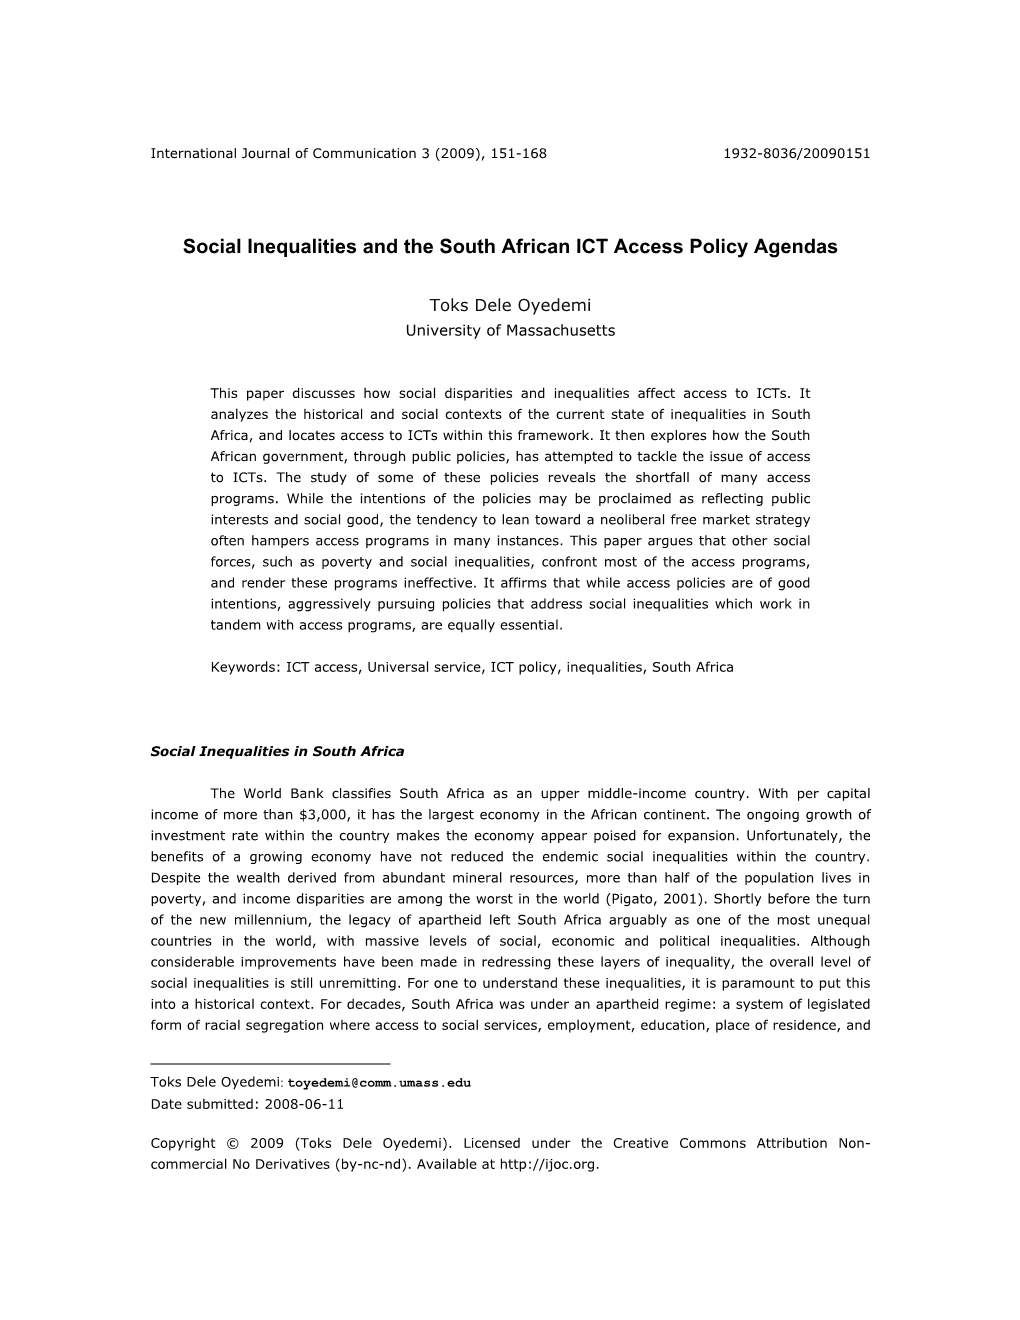 Social Inequalities and the South African ICT Access Policy Agendas